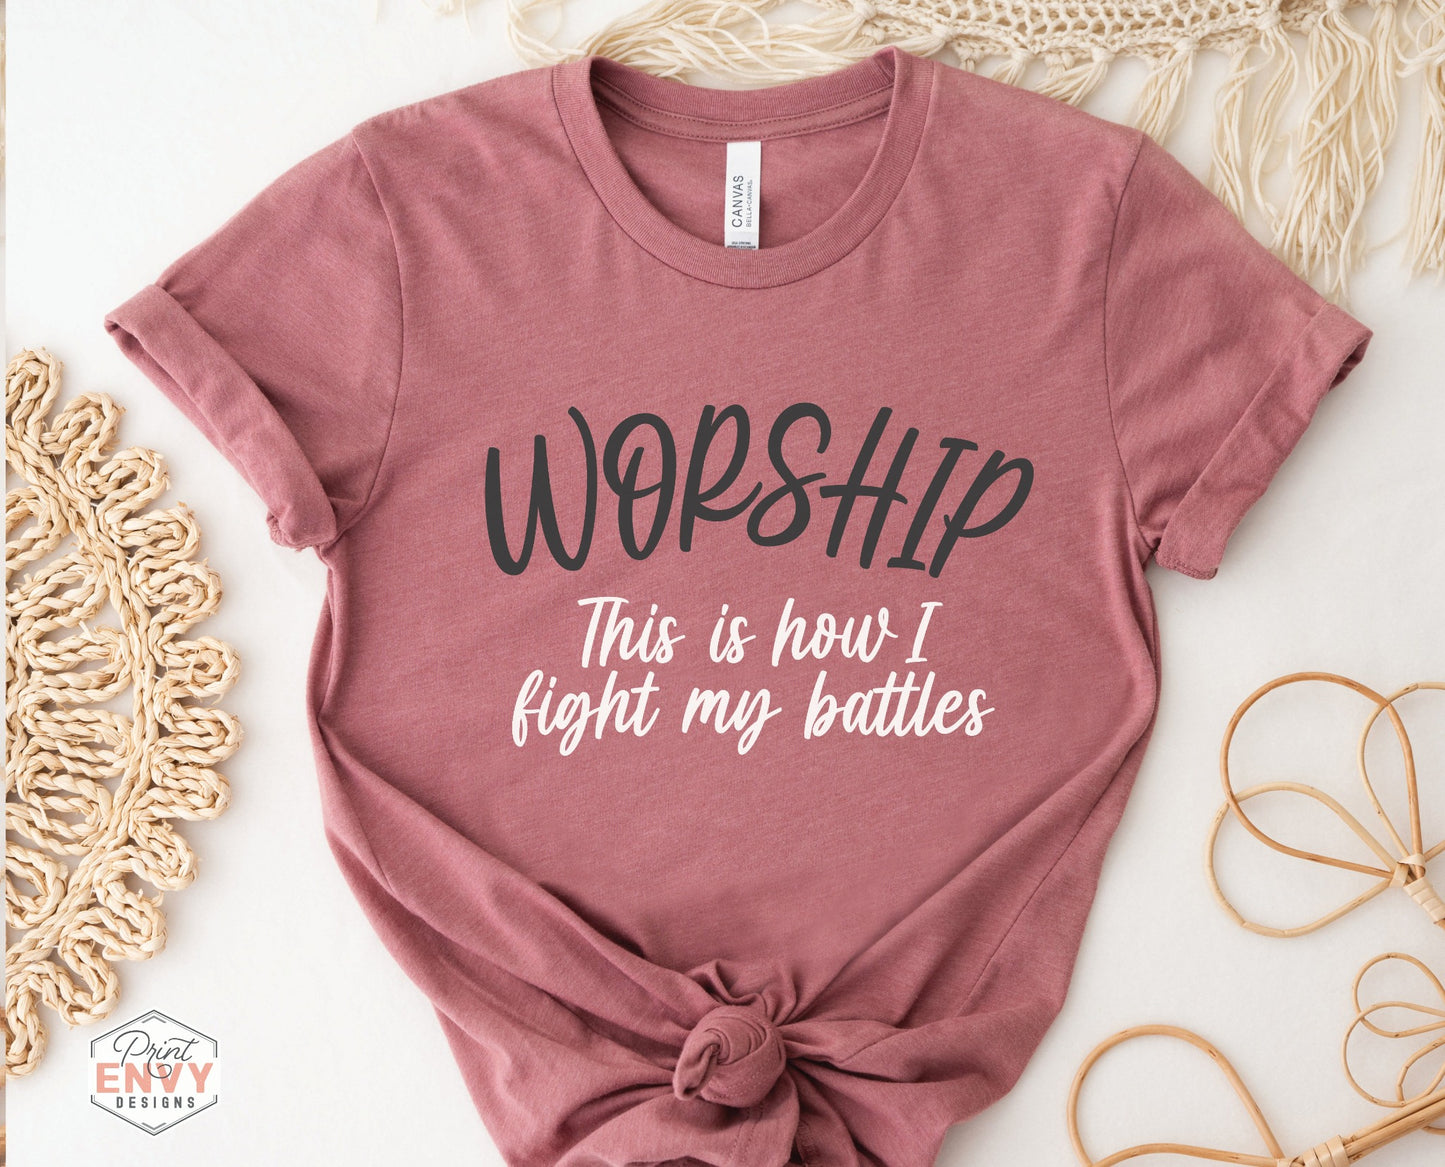 Worship This Is How I Fight My Battles Christian aesthetic t-shirt design printed in white and teal on soft mauve dusty rose tee for women, great gift for worship leaders